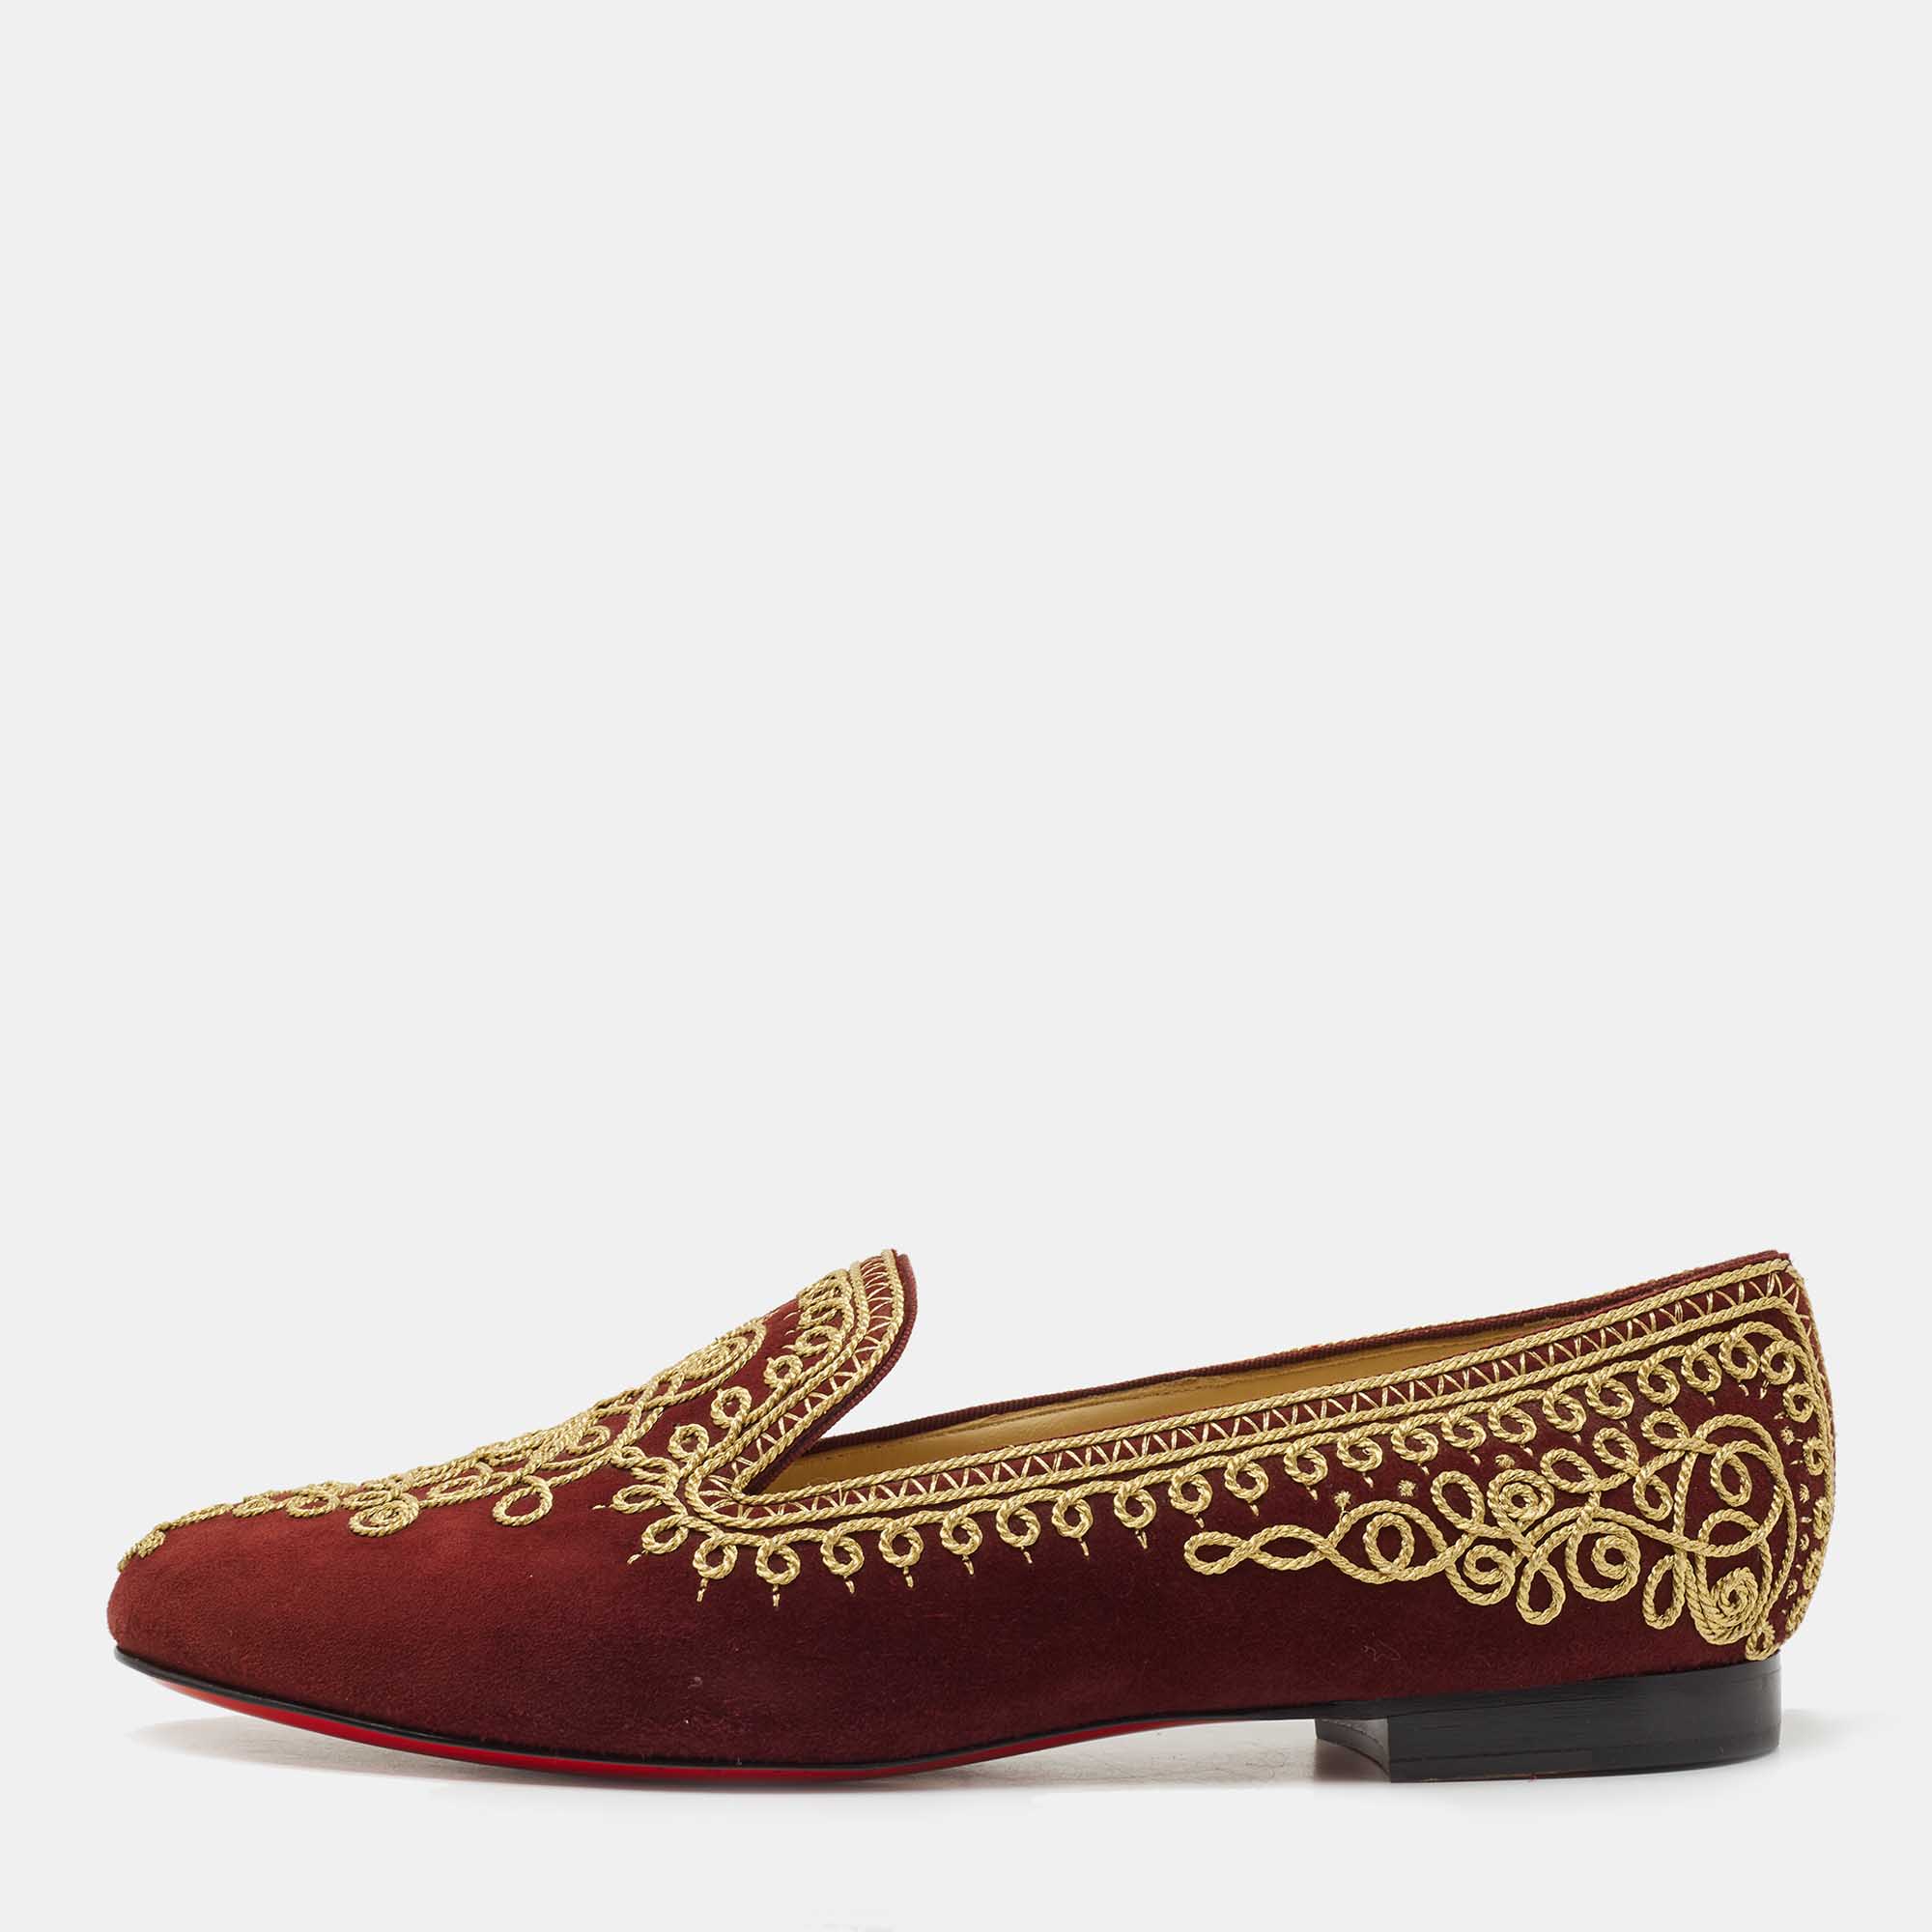 Pre-owned Christian Louboutin Burgundy Embroidered Suede Mamounia Smoking Slippers Size 40.5